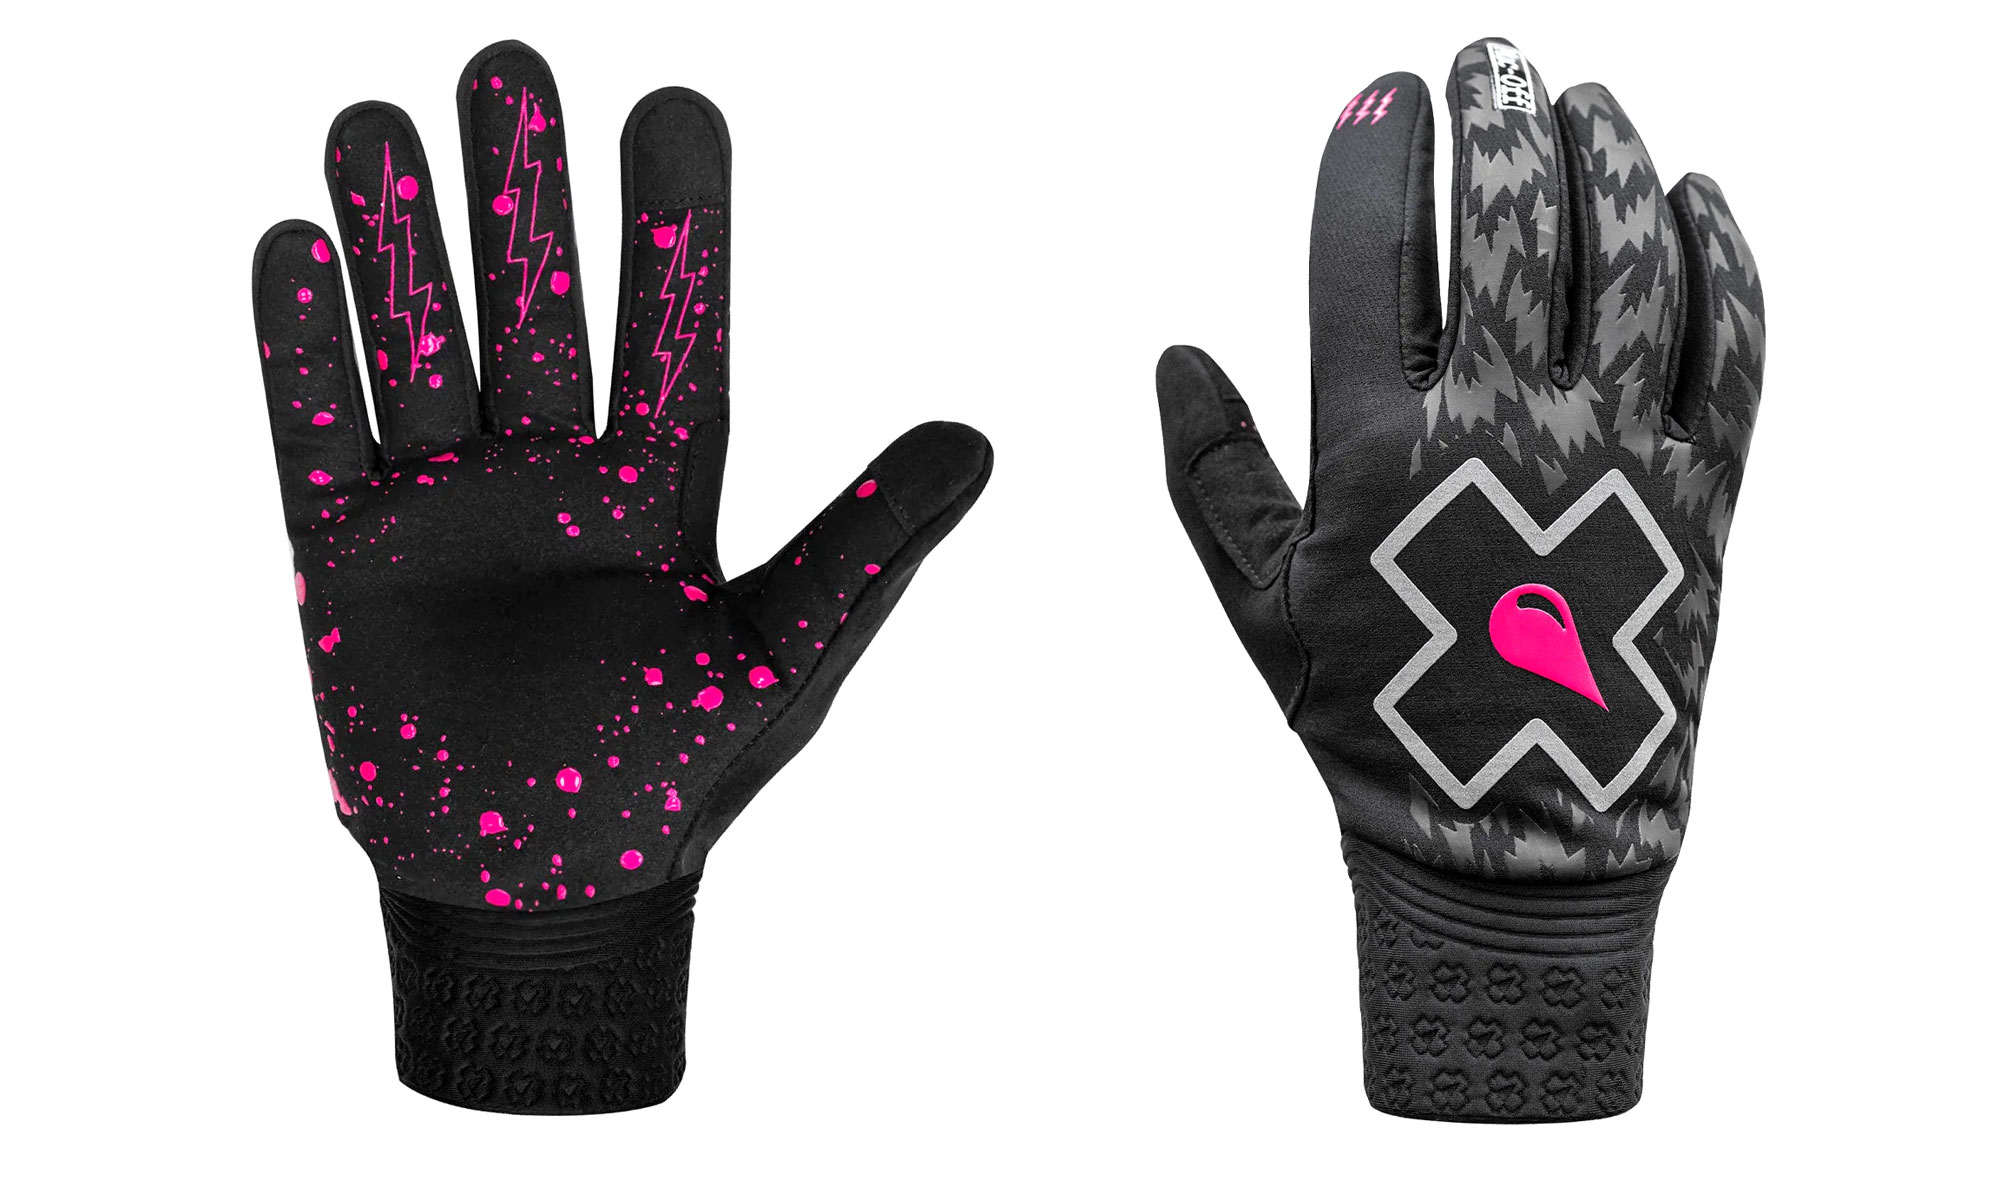 Muc-Off Winter Rider Gloves offer Thinsulate insulation for MTB weather protection, back & palm